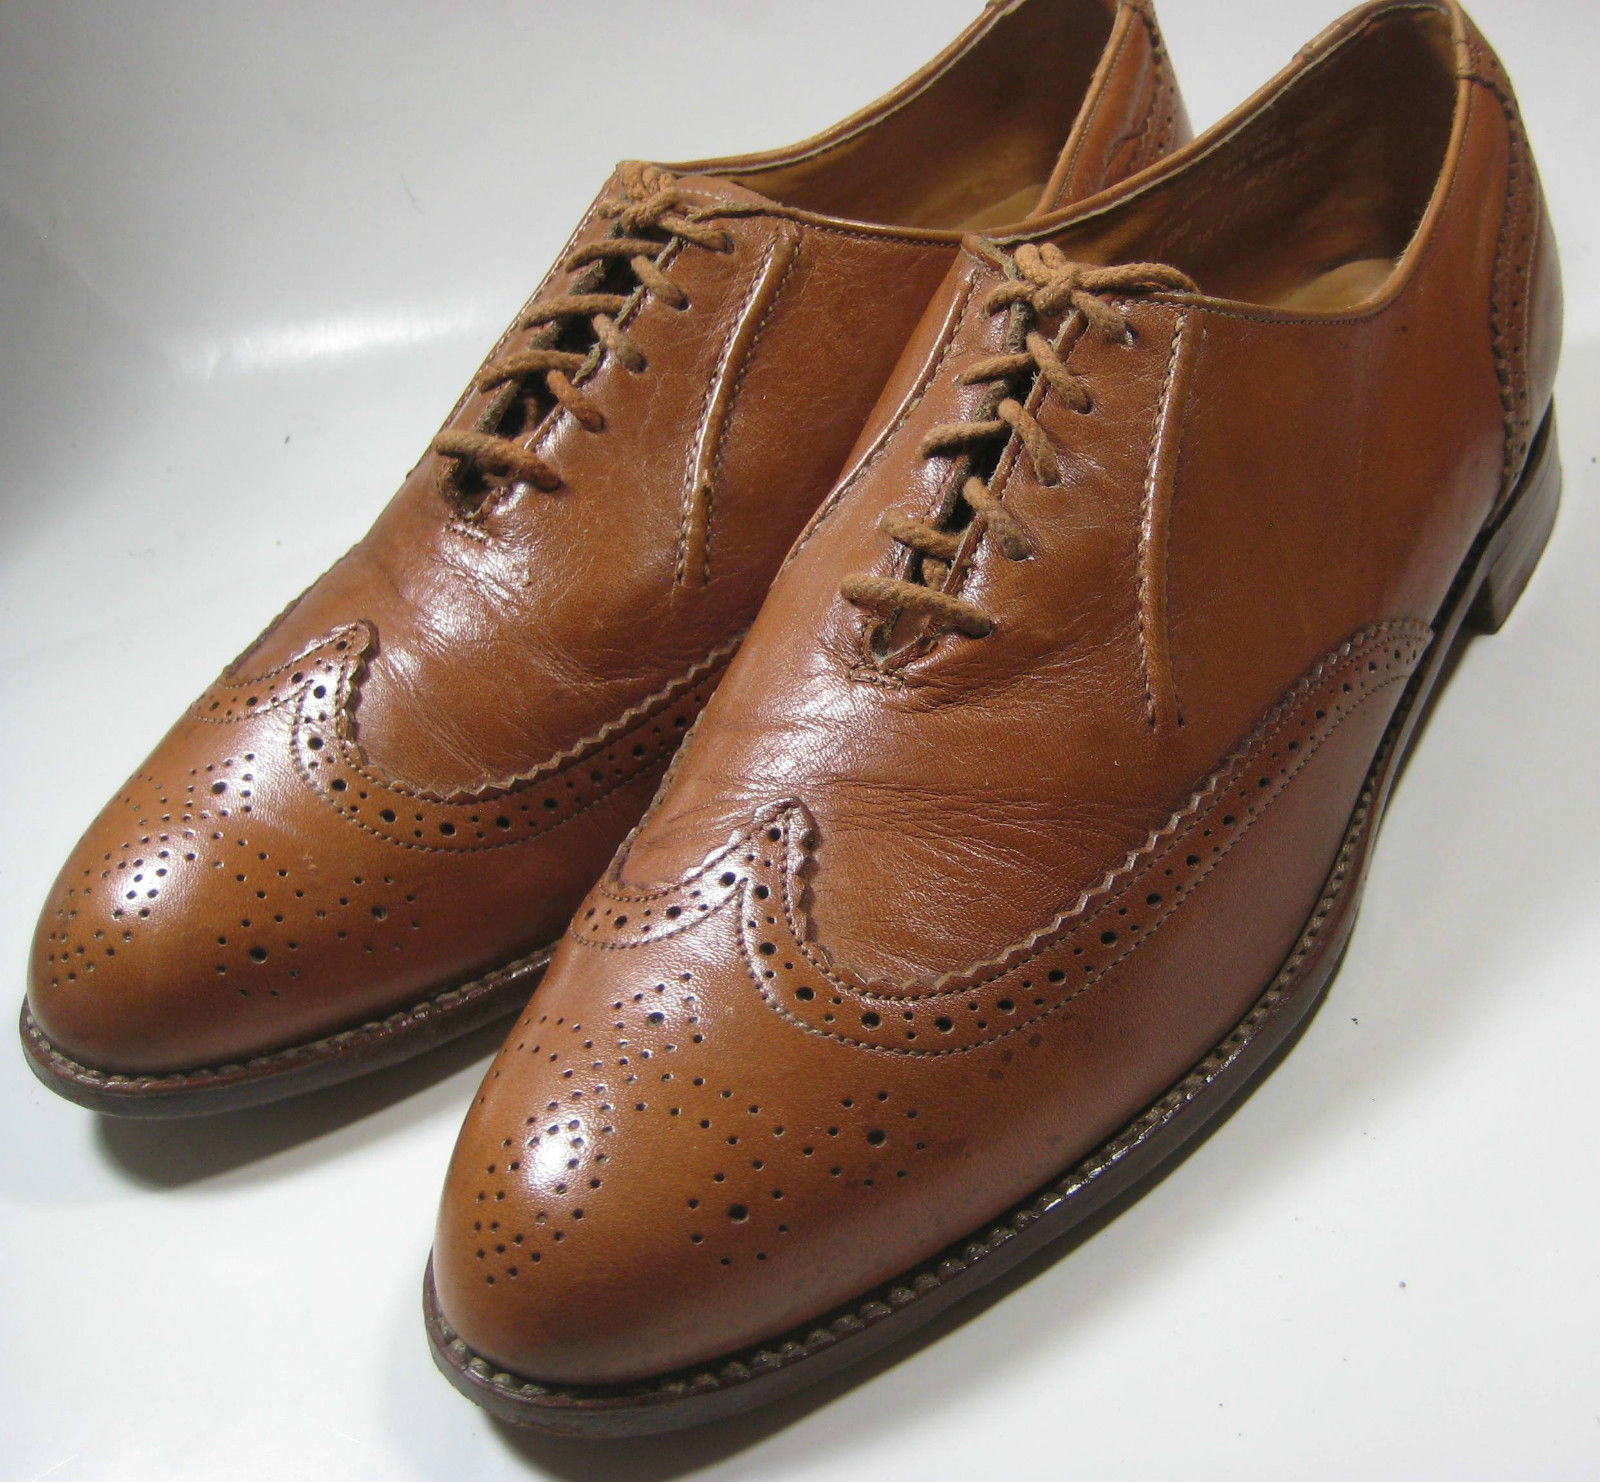 ULTRA RARE 10M Rich Almond Brown Leather Wingtips RARE Quality - Dress ...